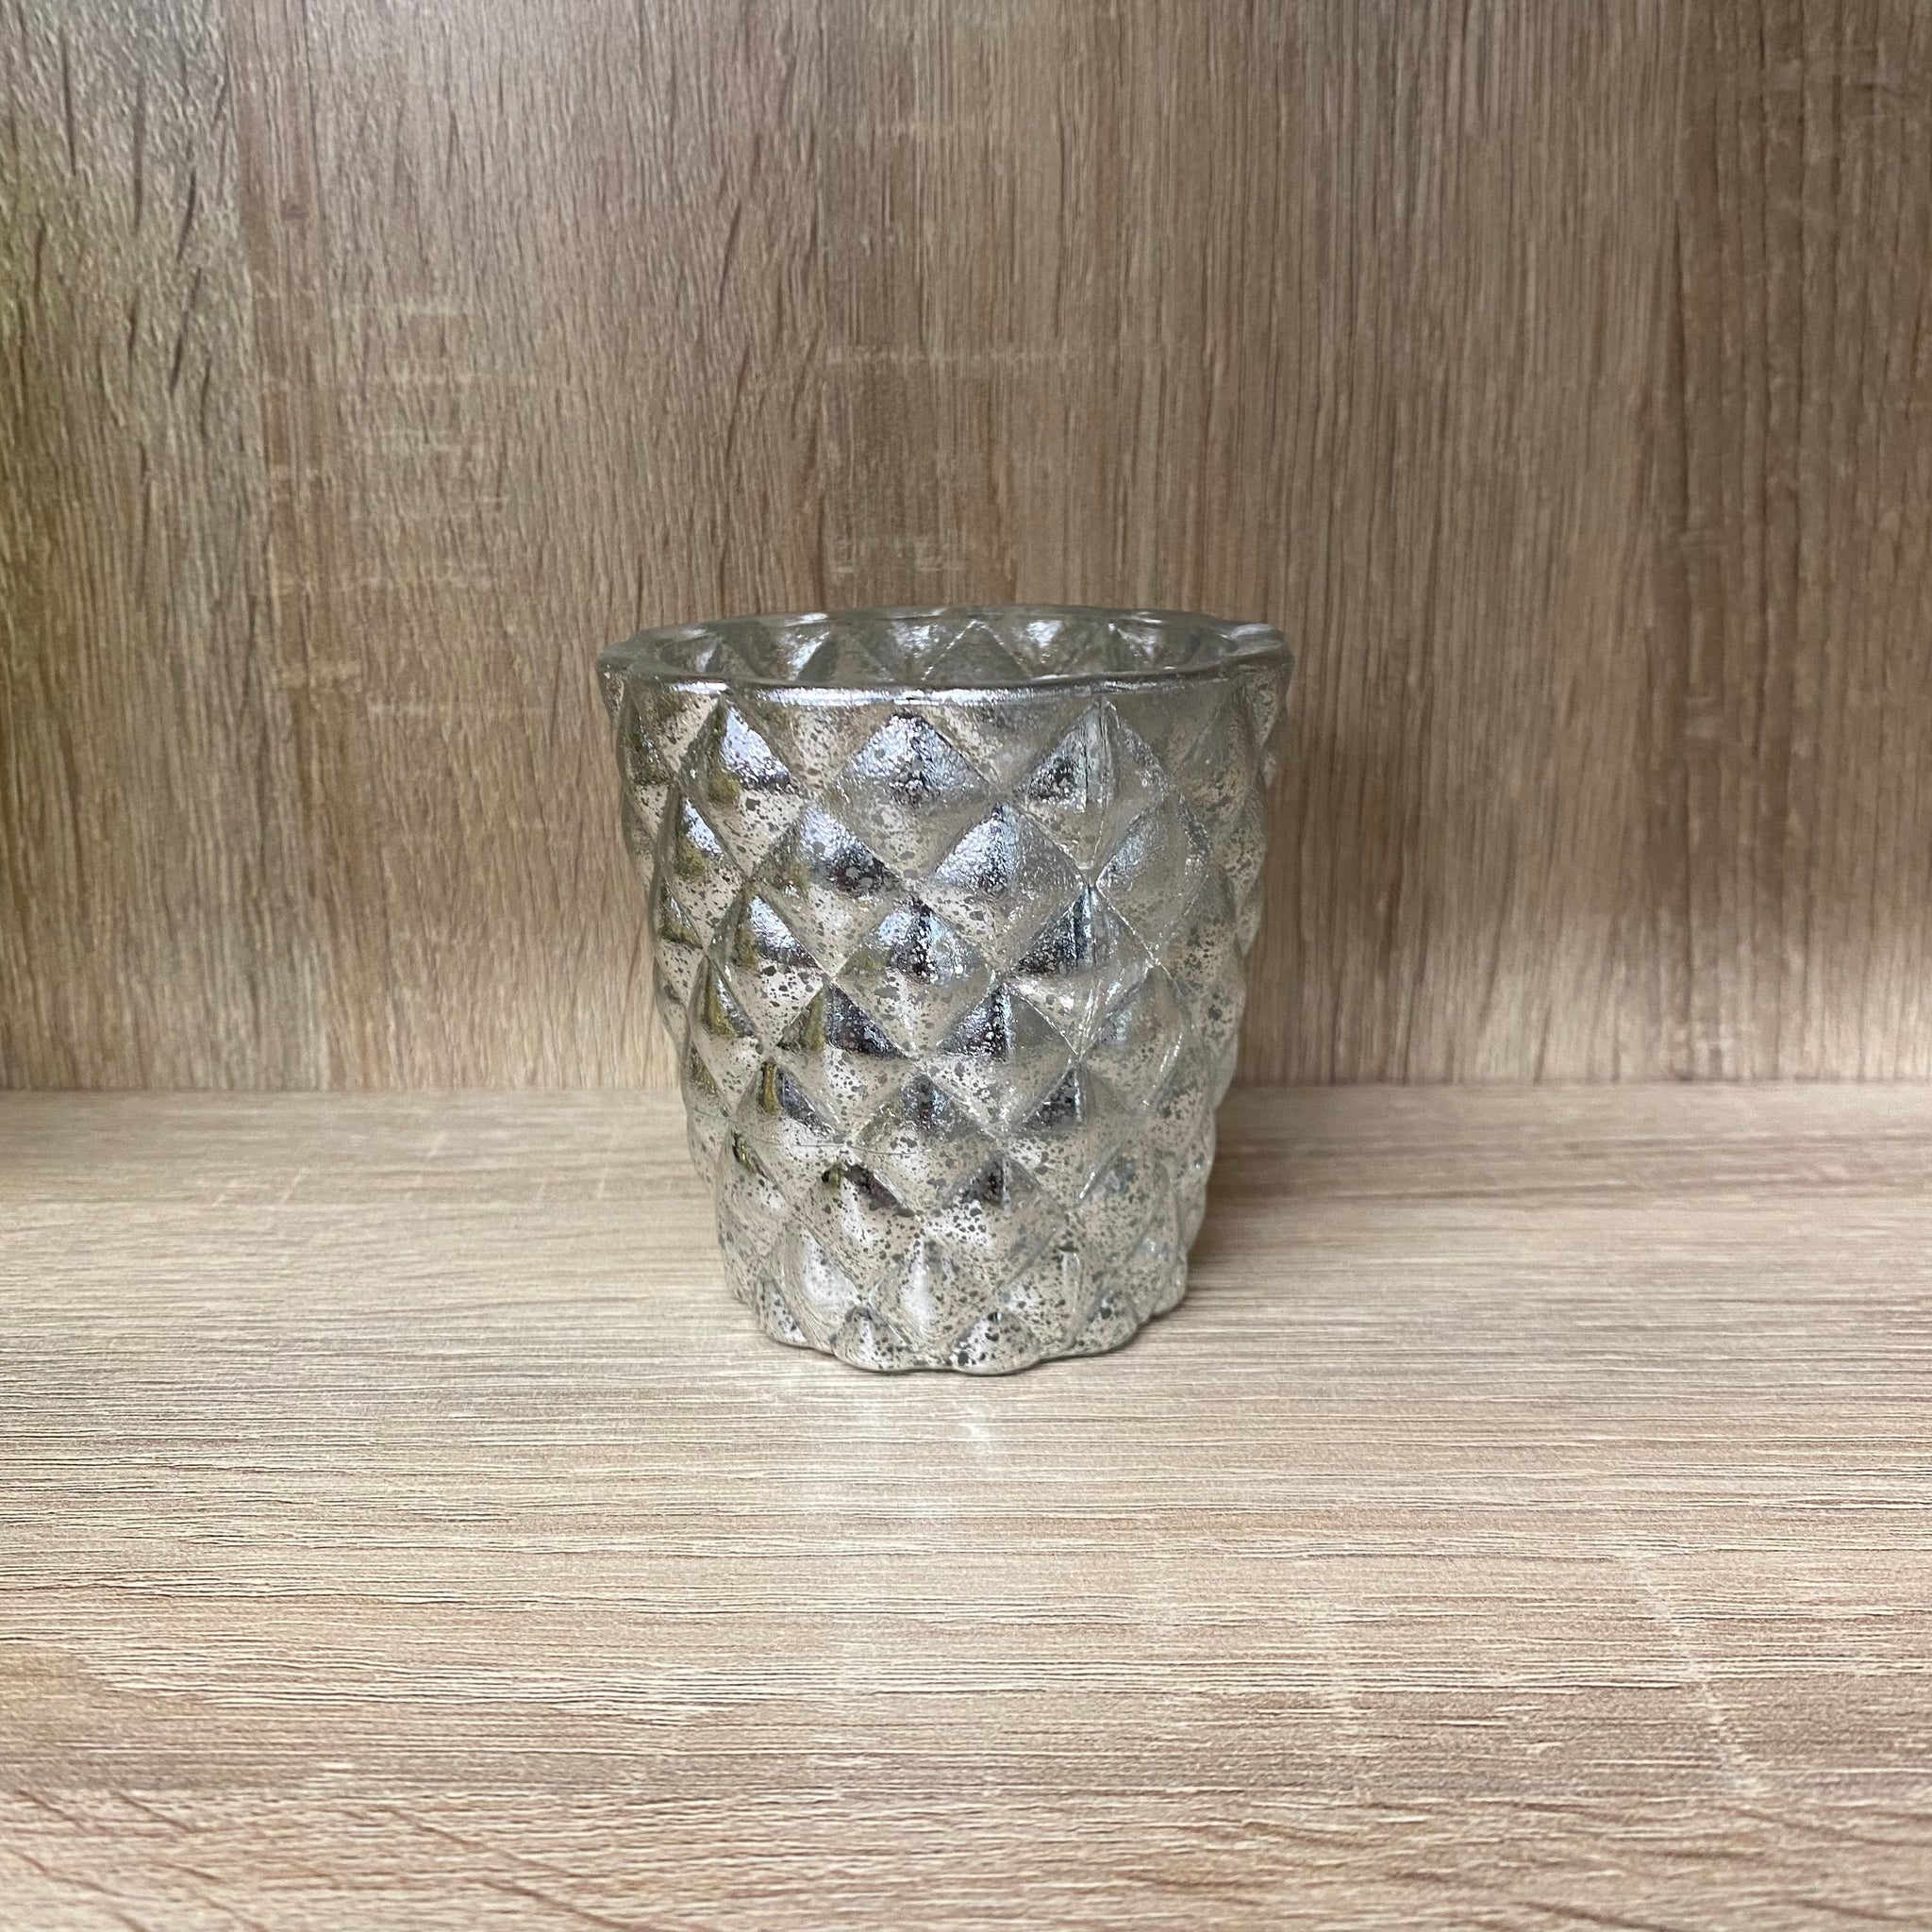 Quilted Mercury Glass Tealight Holder - Silver - EX HIRE ITEM - The Pretty Prop Shop Parties